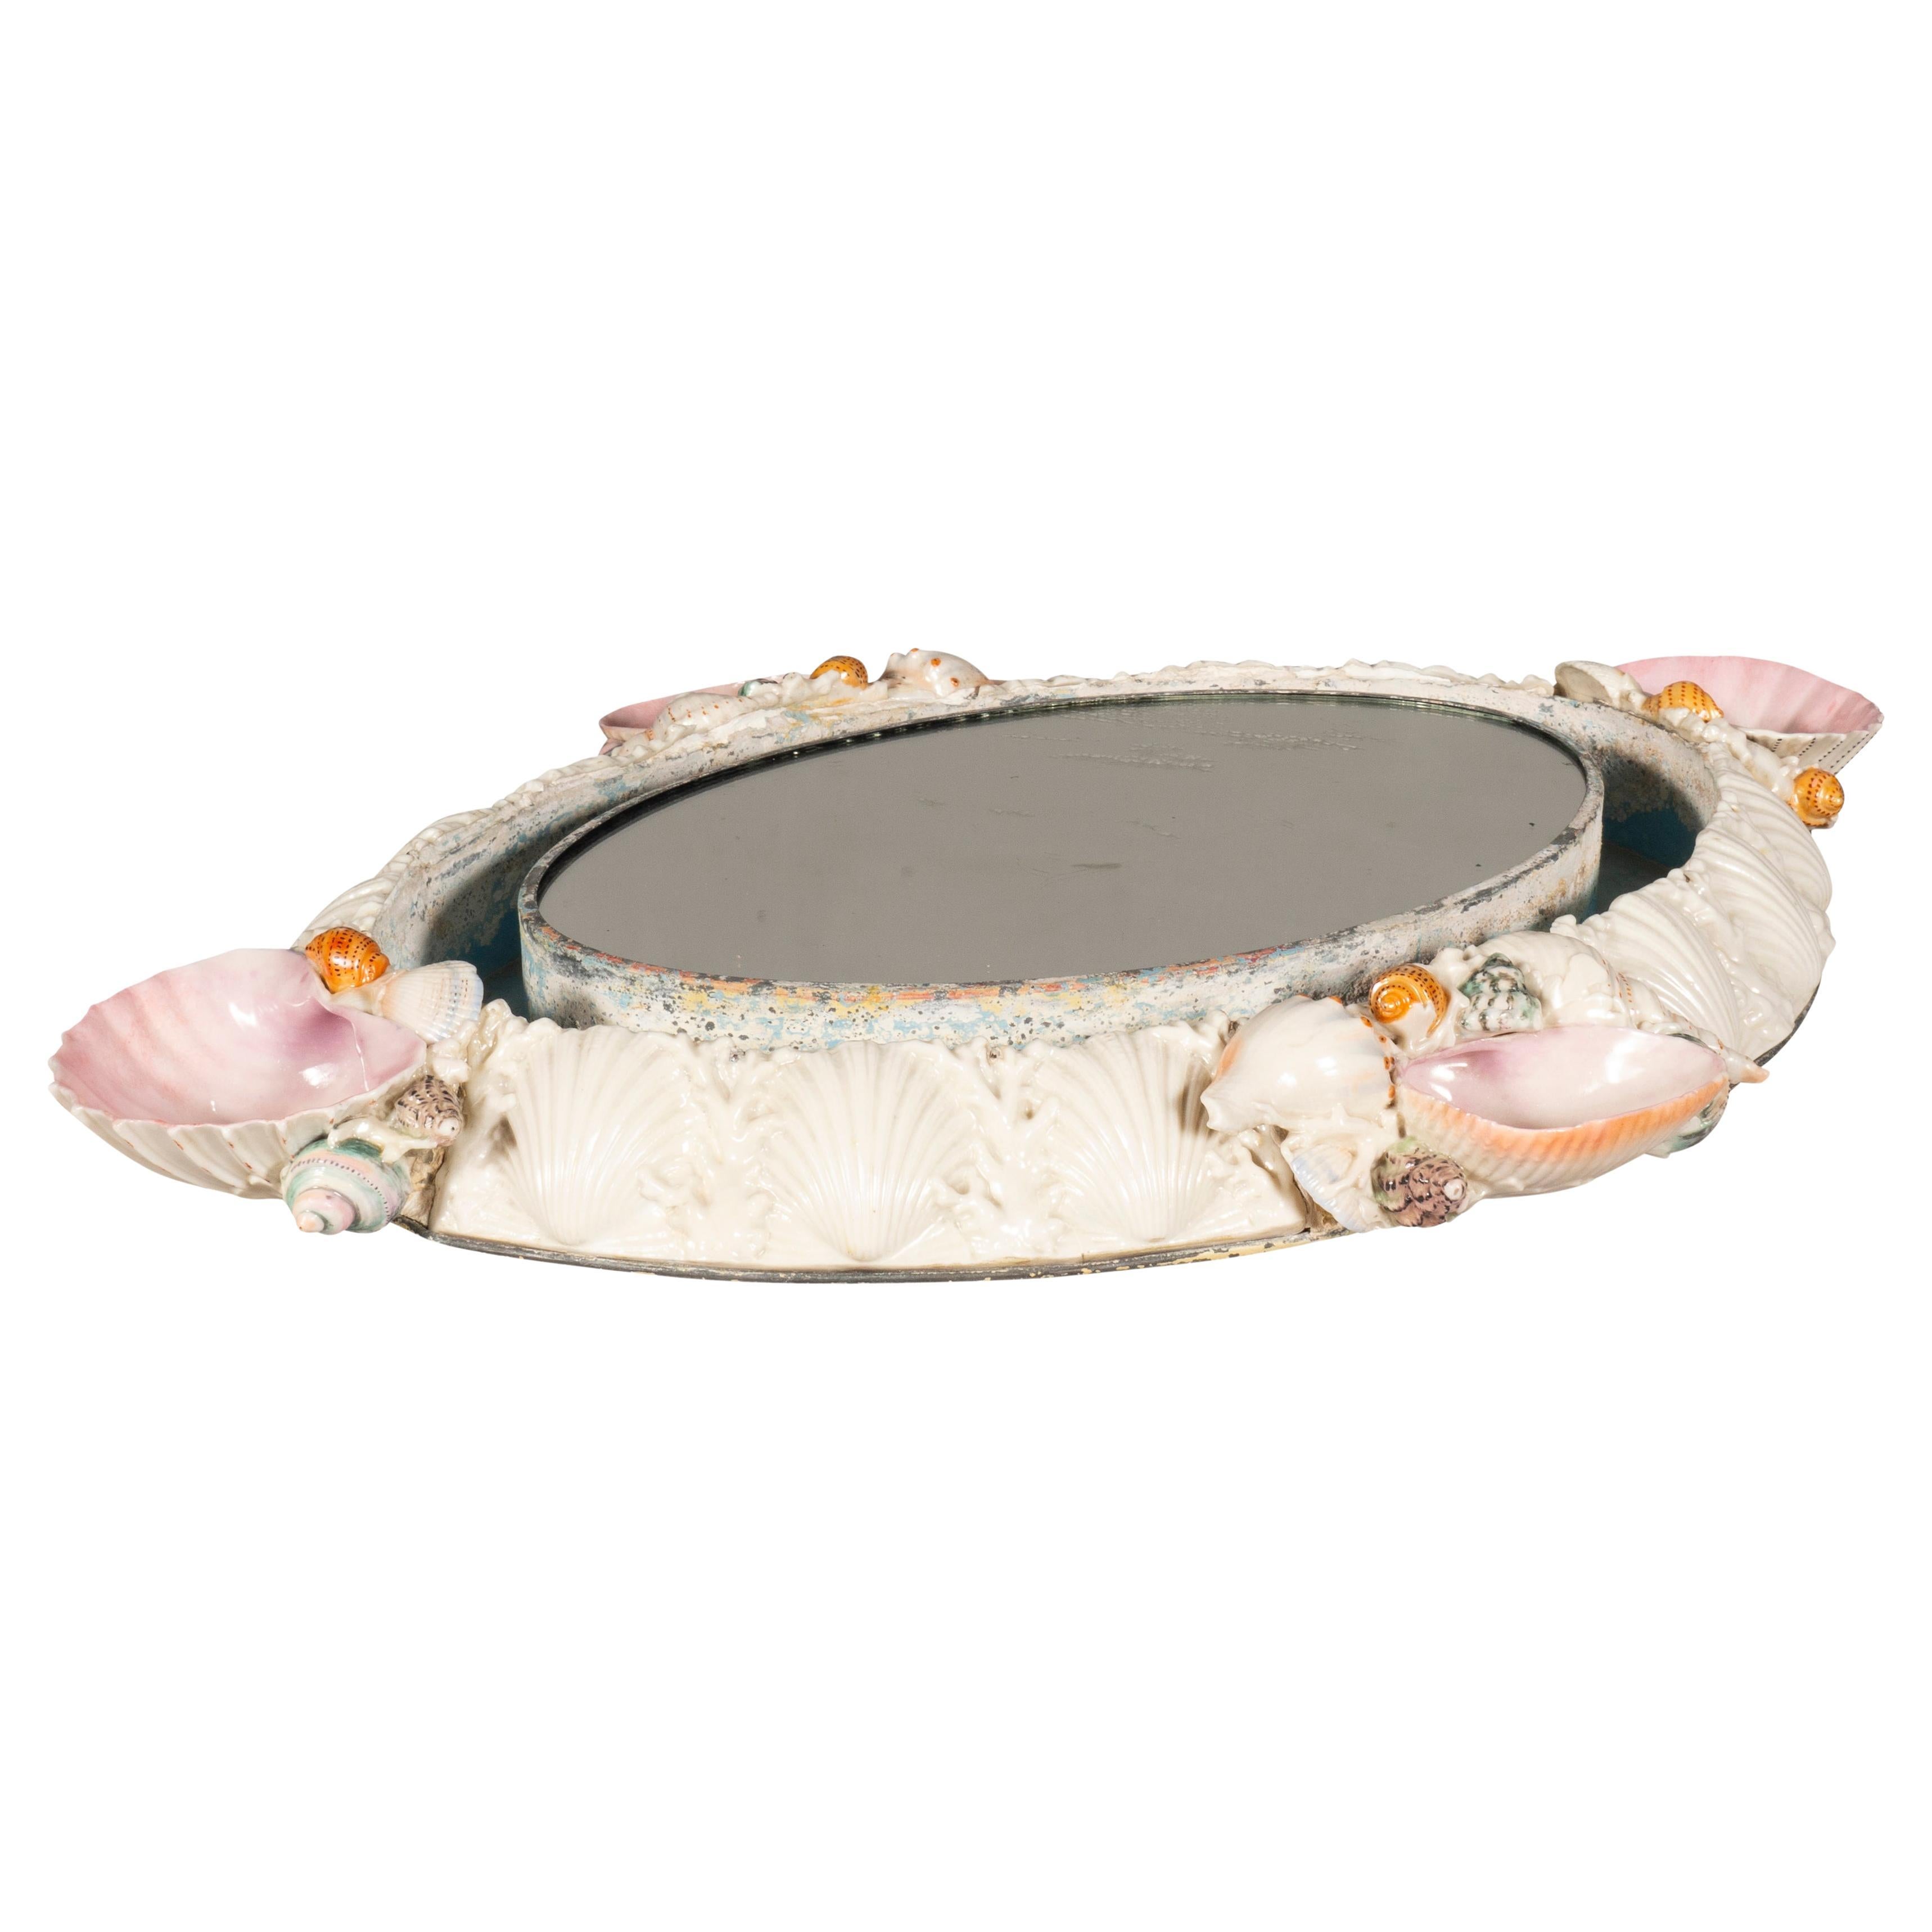 Unusual Porcelain Plateau With Sea Shell Decoration For Sale